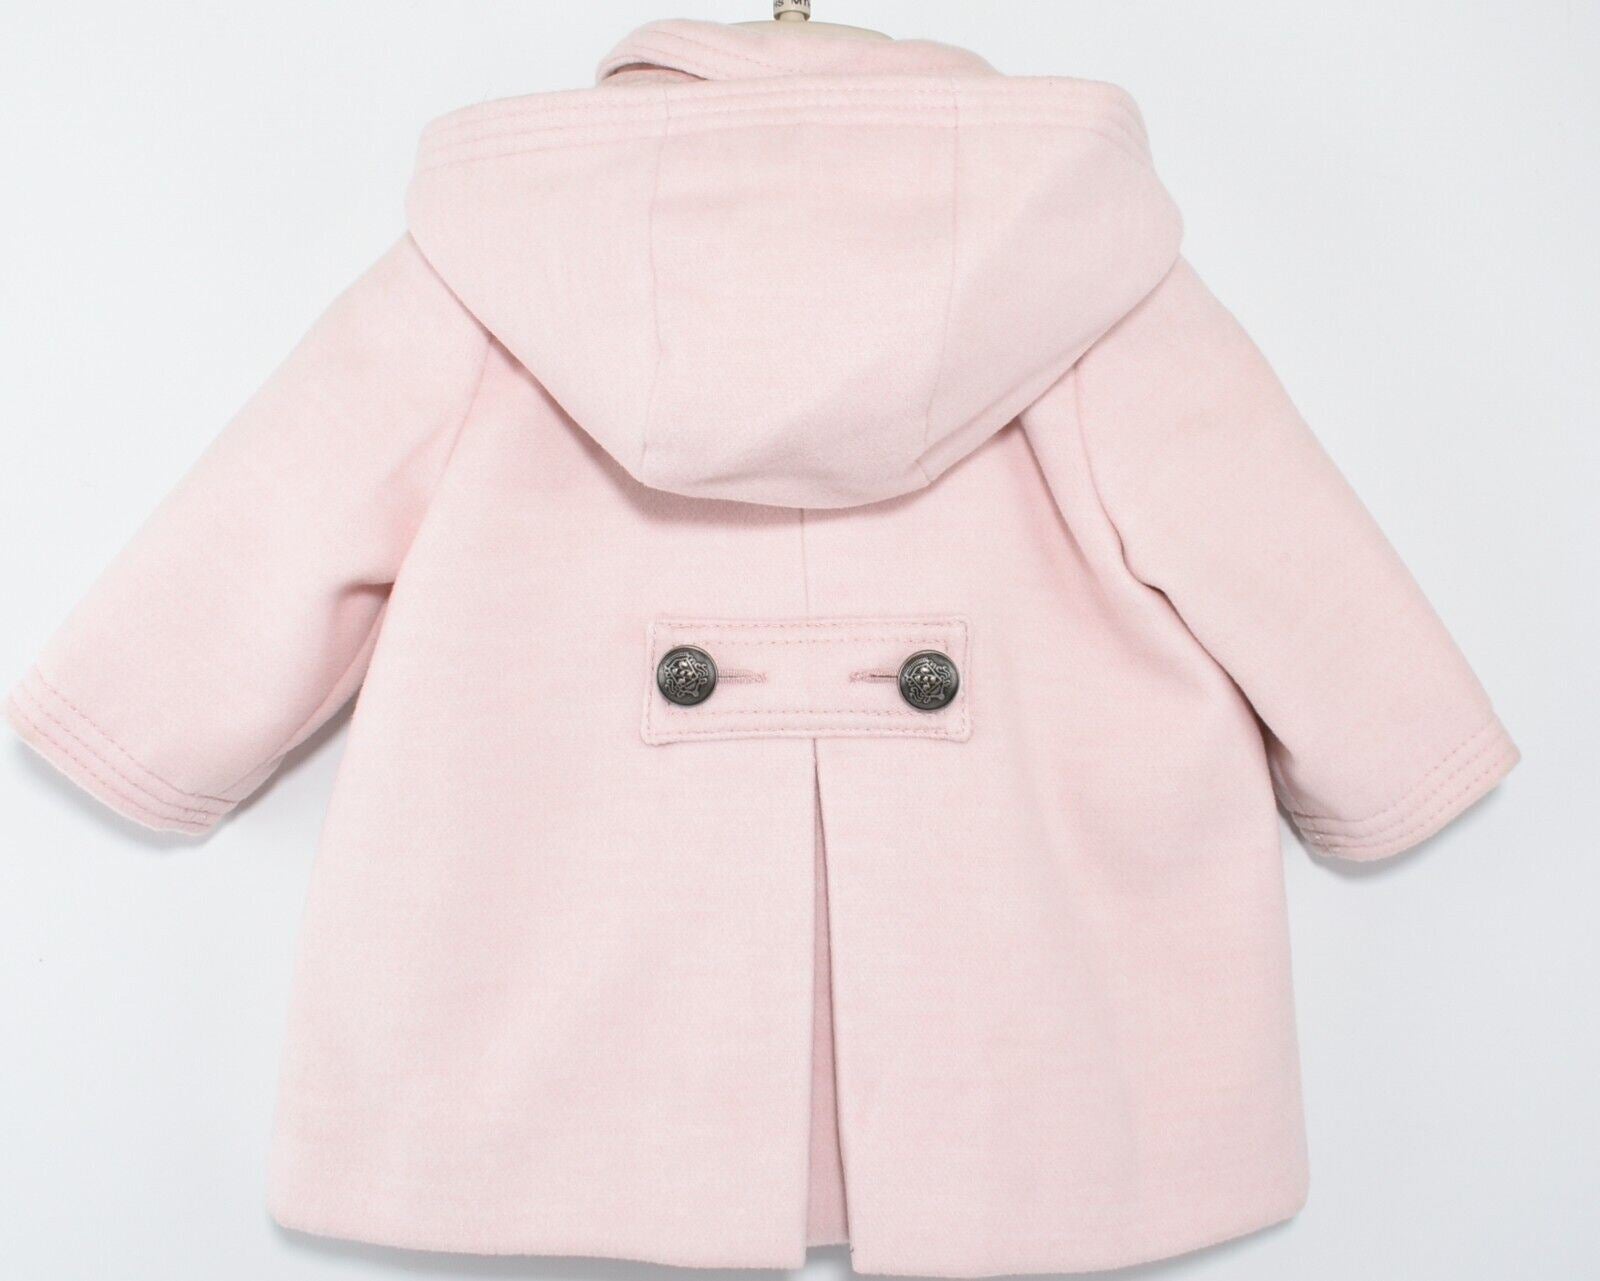 NEXT Baby Girls Hooded Coat, Light Pink, size 12-18 months